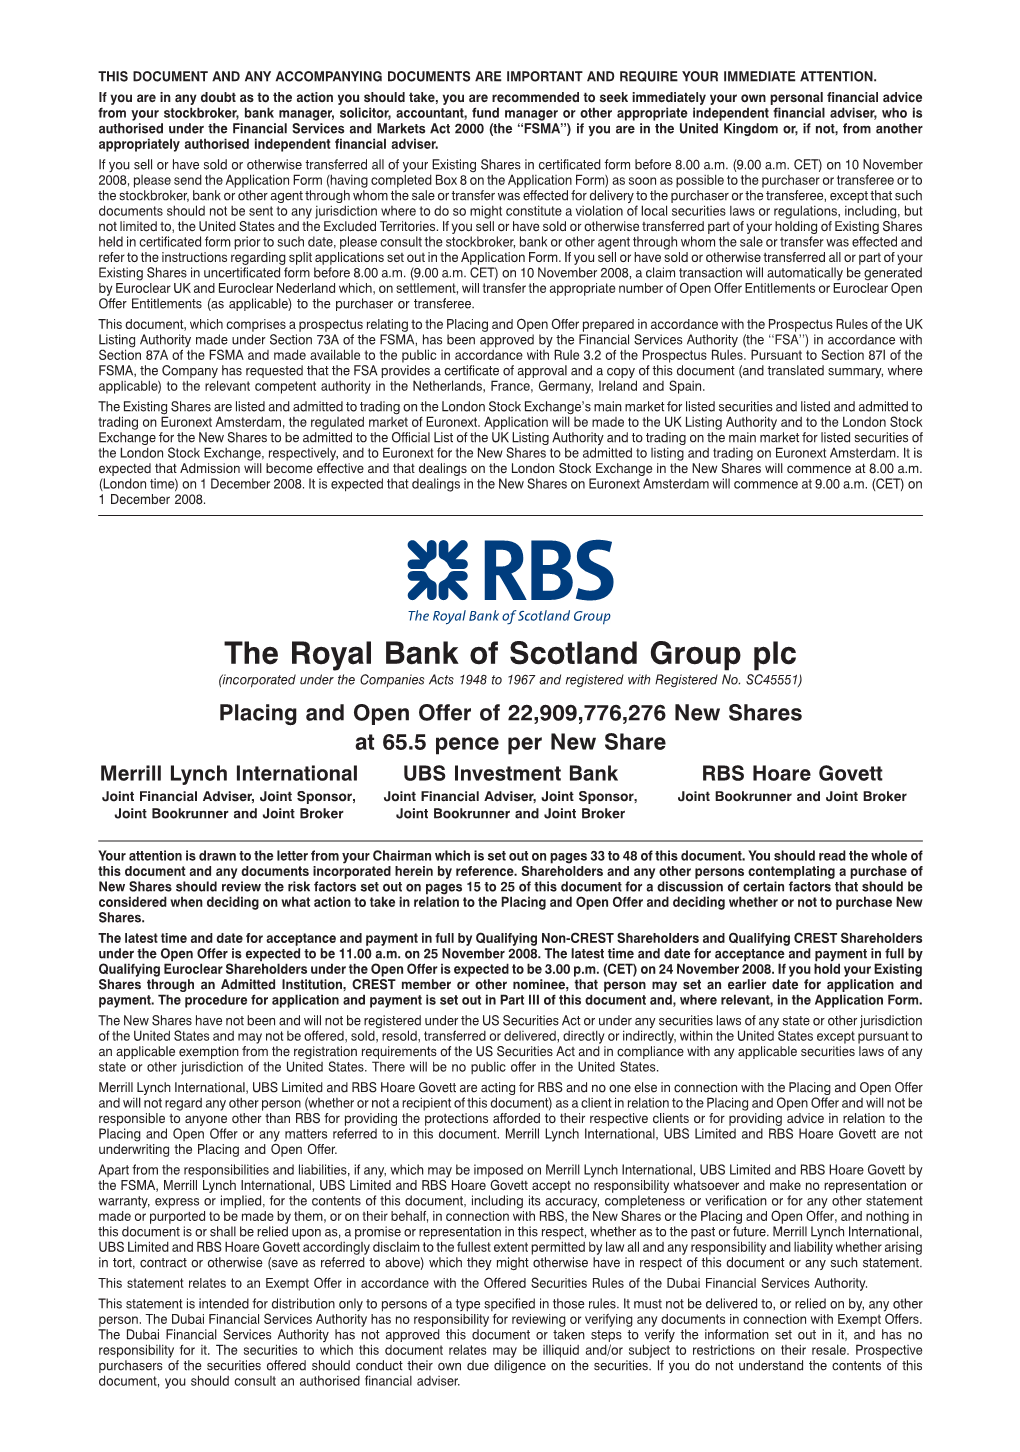 The Royal Bank of Scotland Group Plc (Incorporated Under the Companies Acts 1948 to 1967 and Registered with Registered No